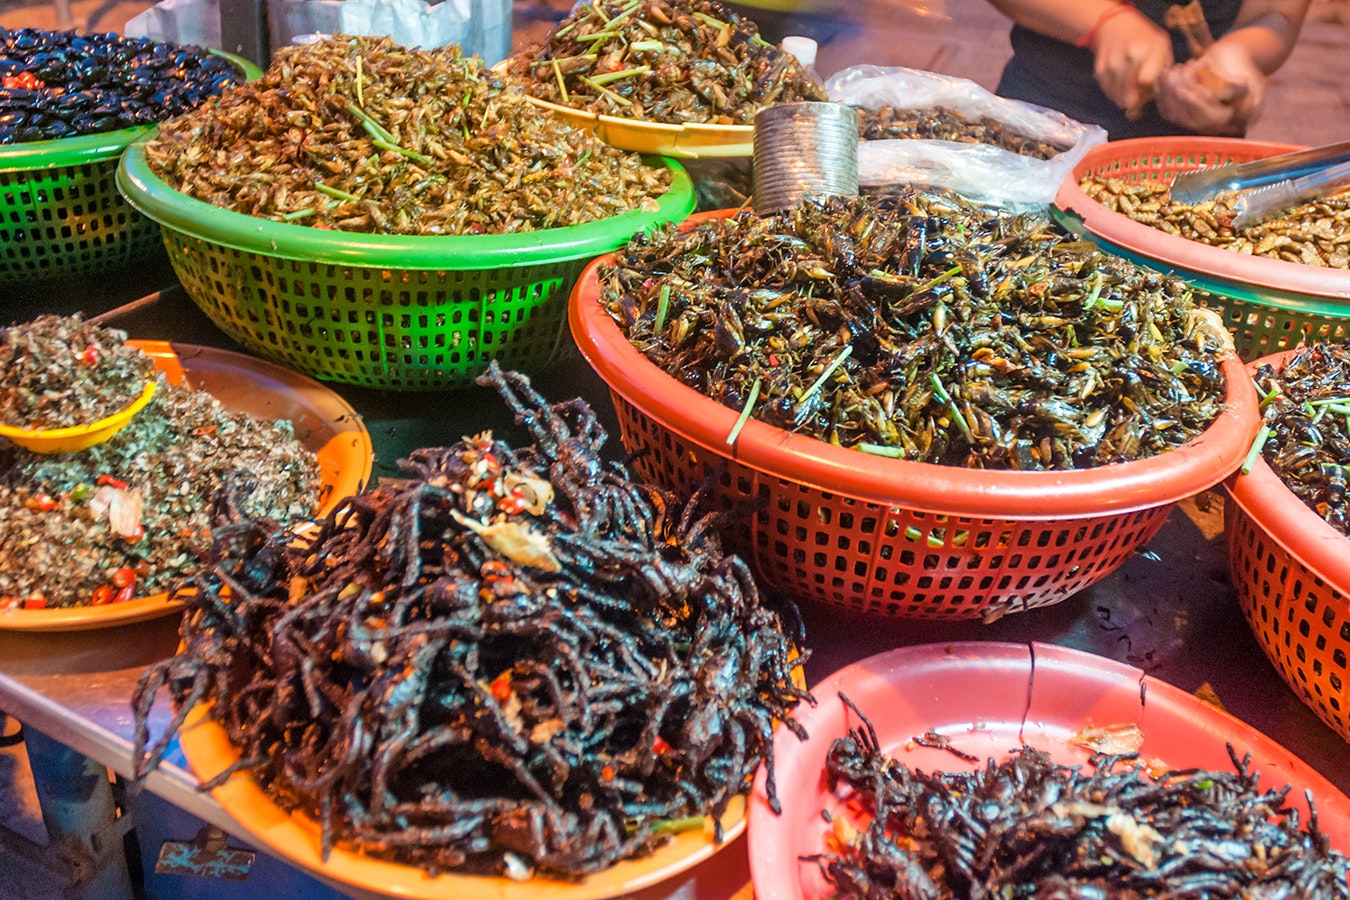 Insect market